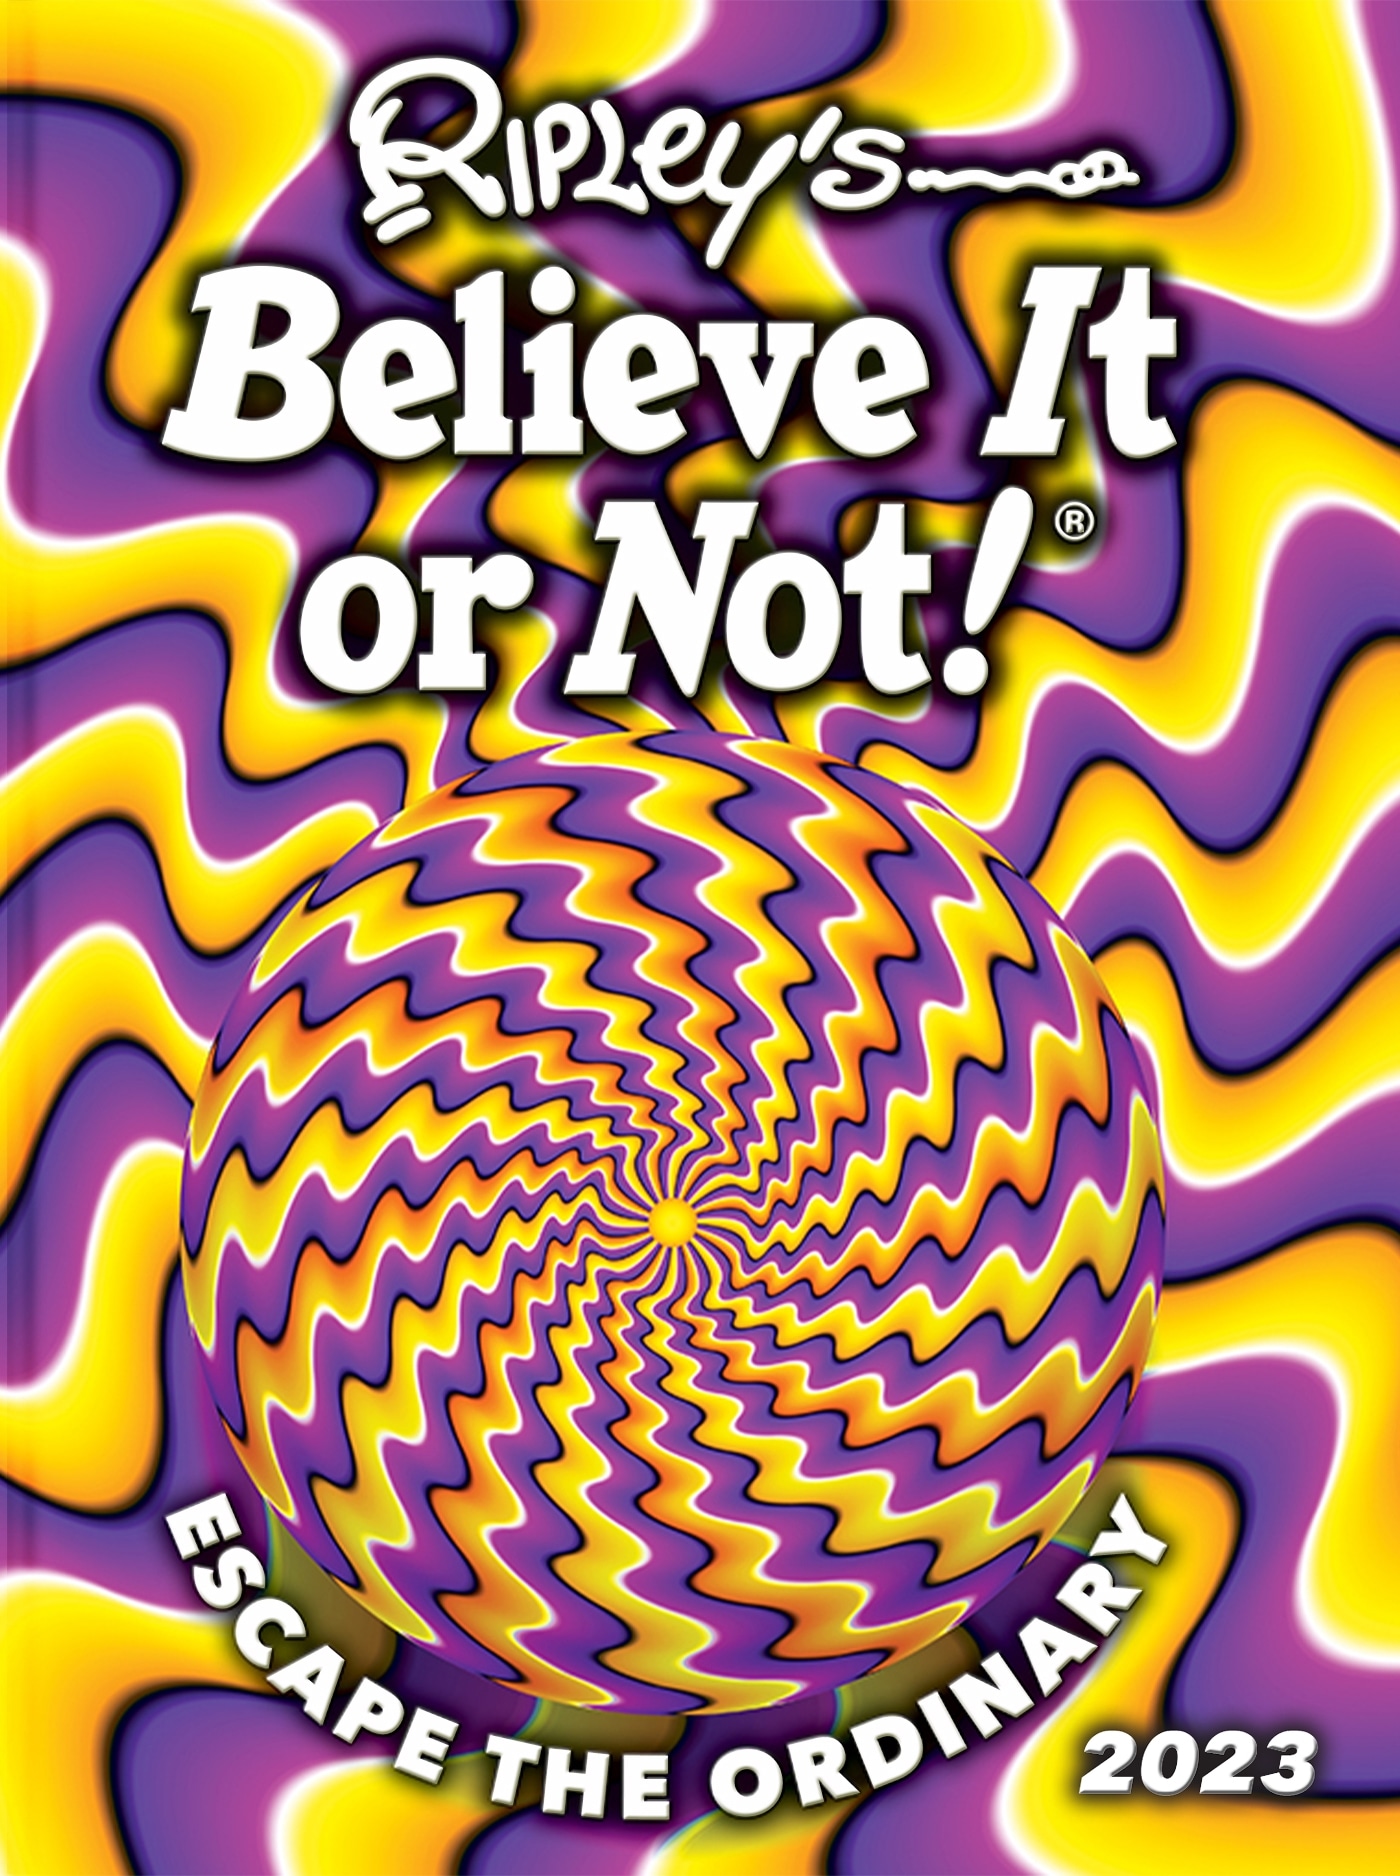 Book “Ripley’s Believe It or Not! 2023” by Ripley — October 13, 2022